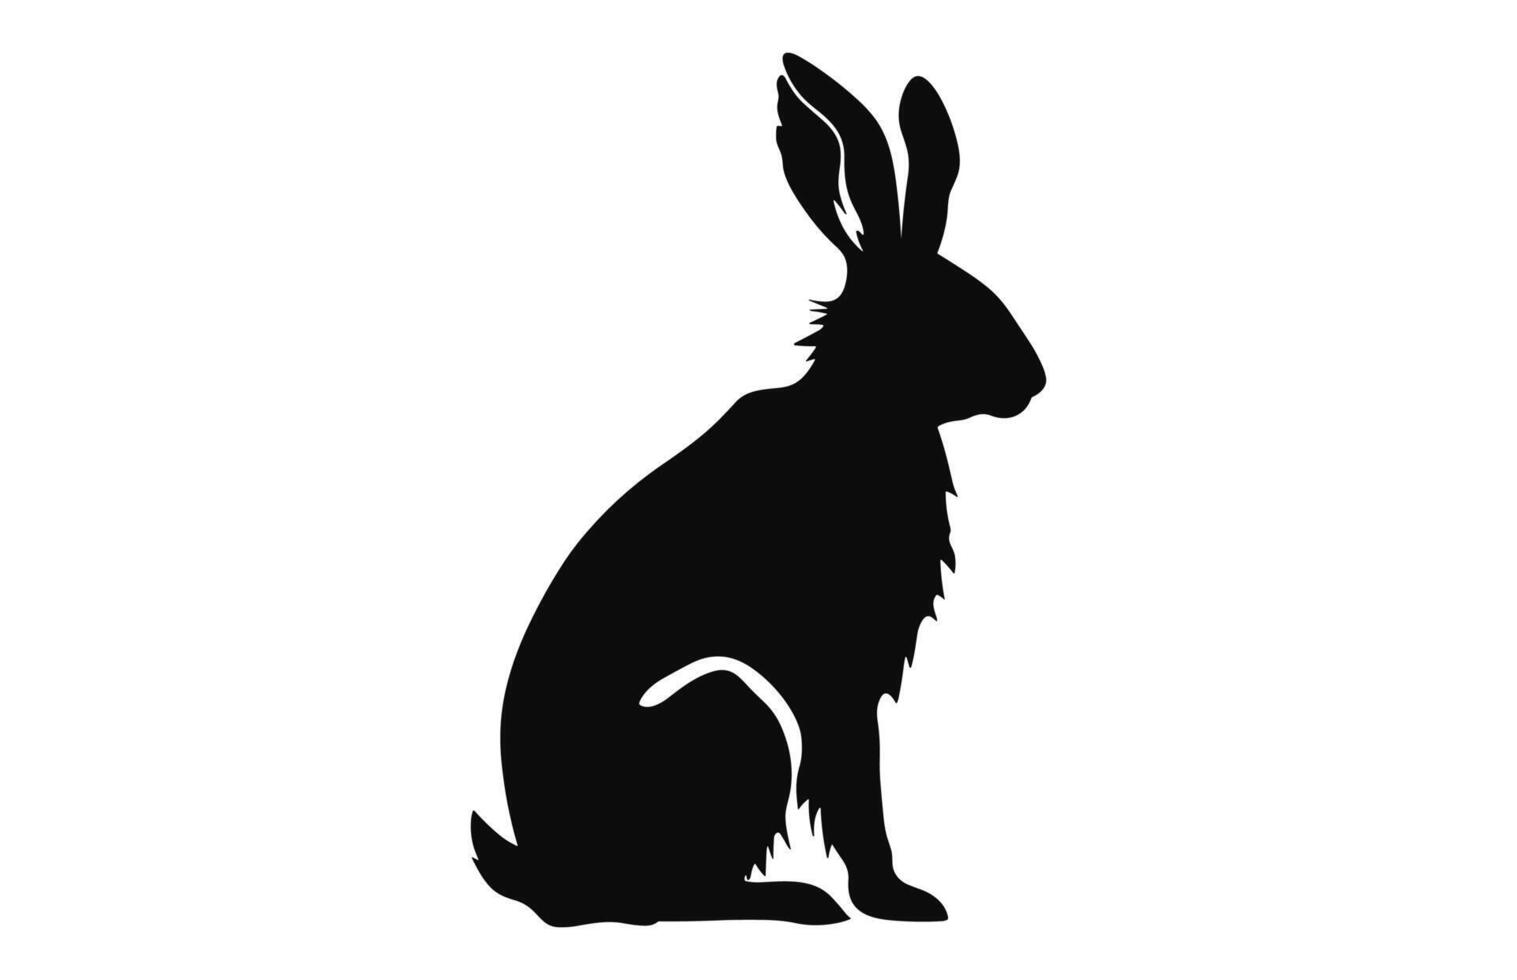 Rabbit black silhouette vector isolated on a white background